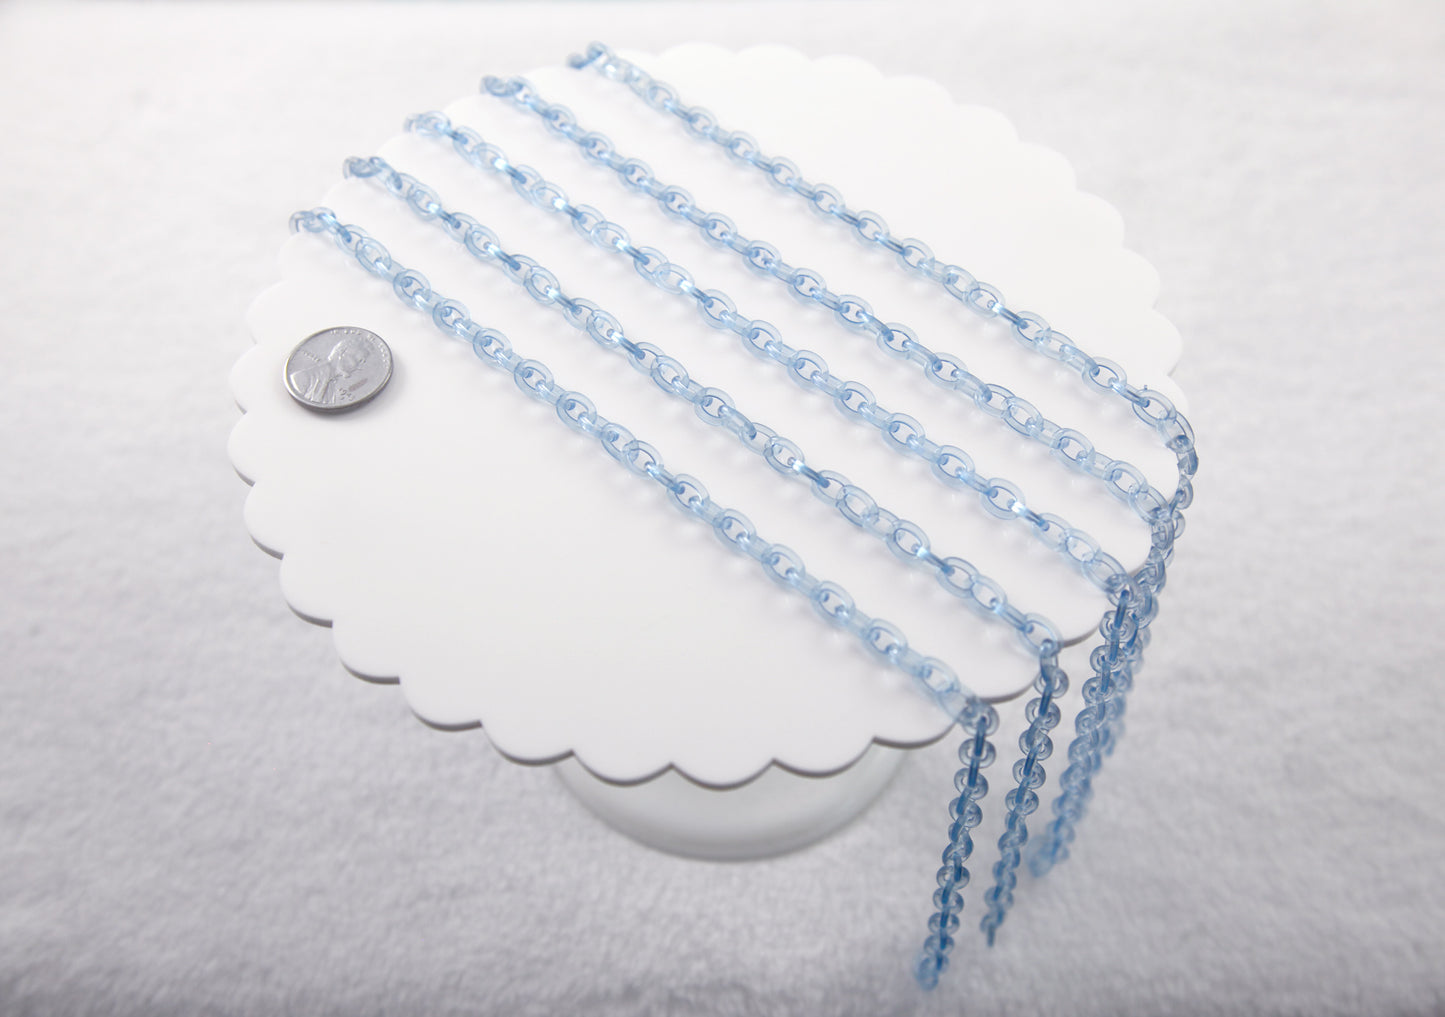 Transparent Blue Plastic Chain - 8mm Perfect Acrylic or Plastic Chain - 20 inch / 50 cm length - For Necklaces and Jewelry - 3 pcs set